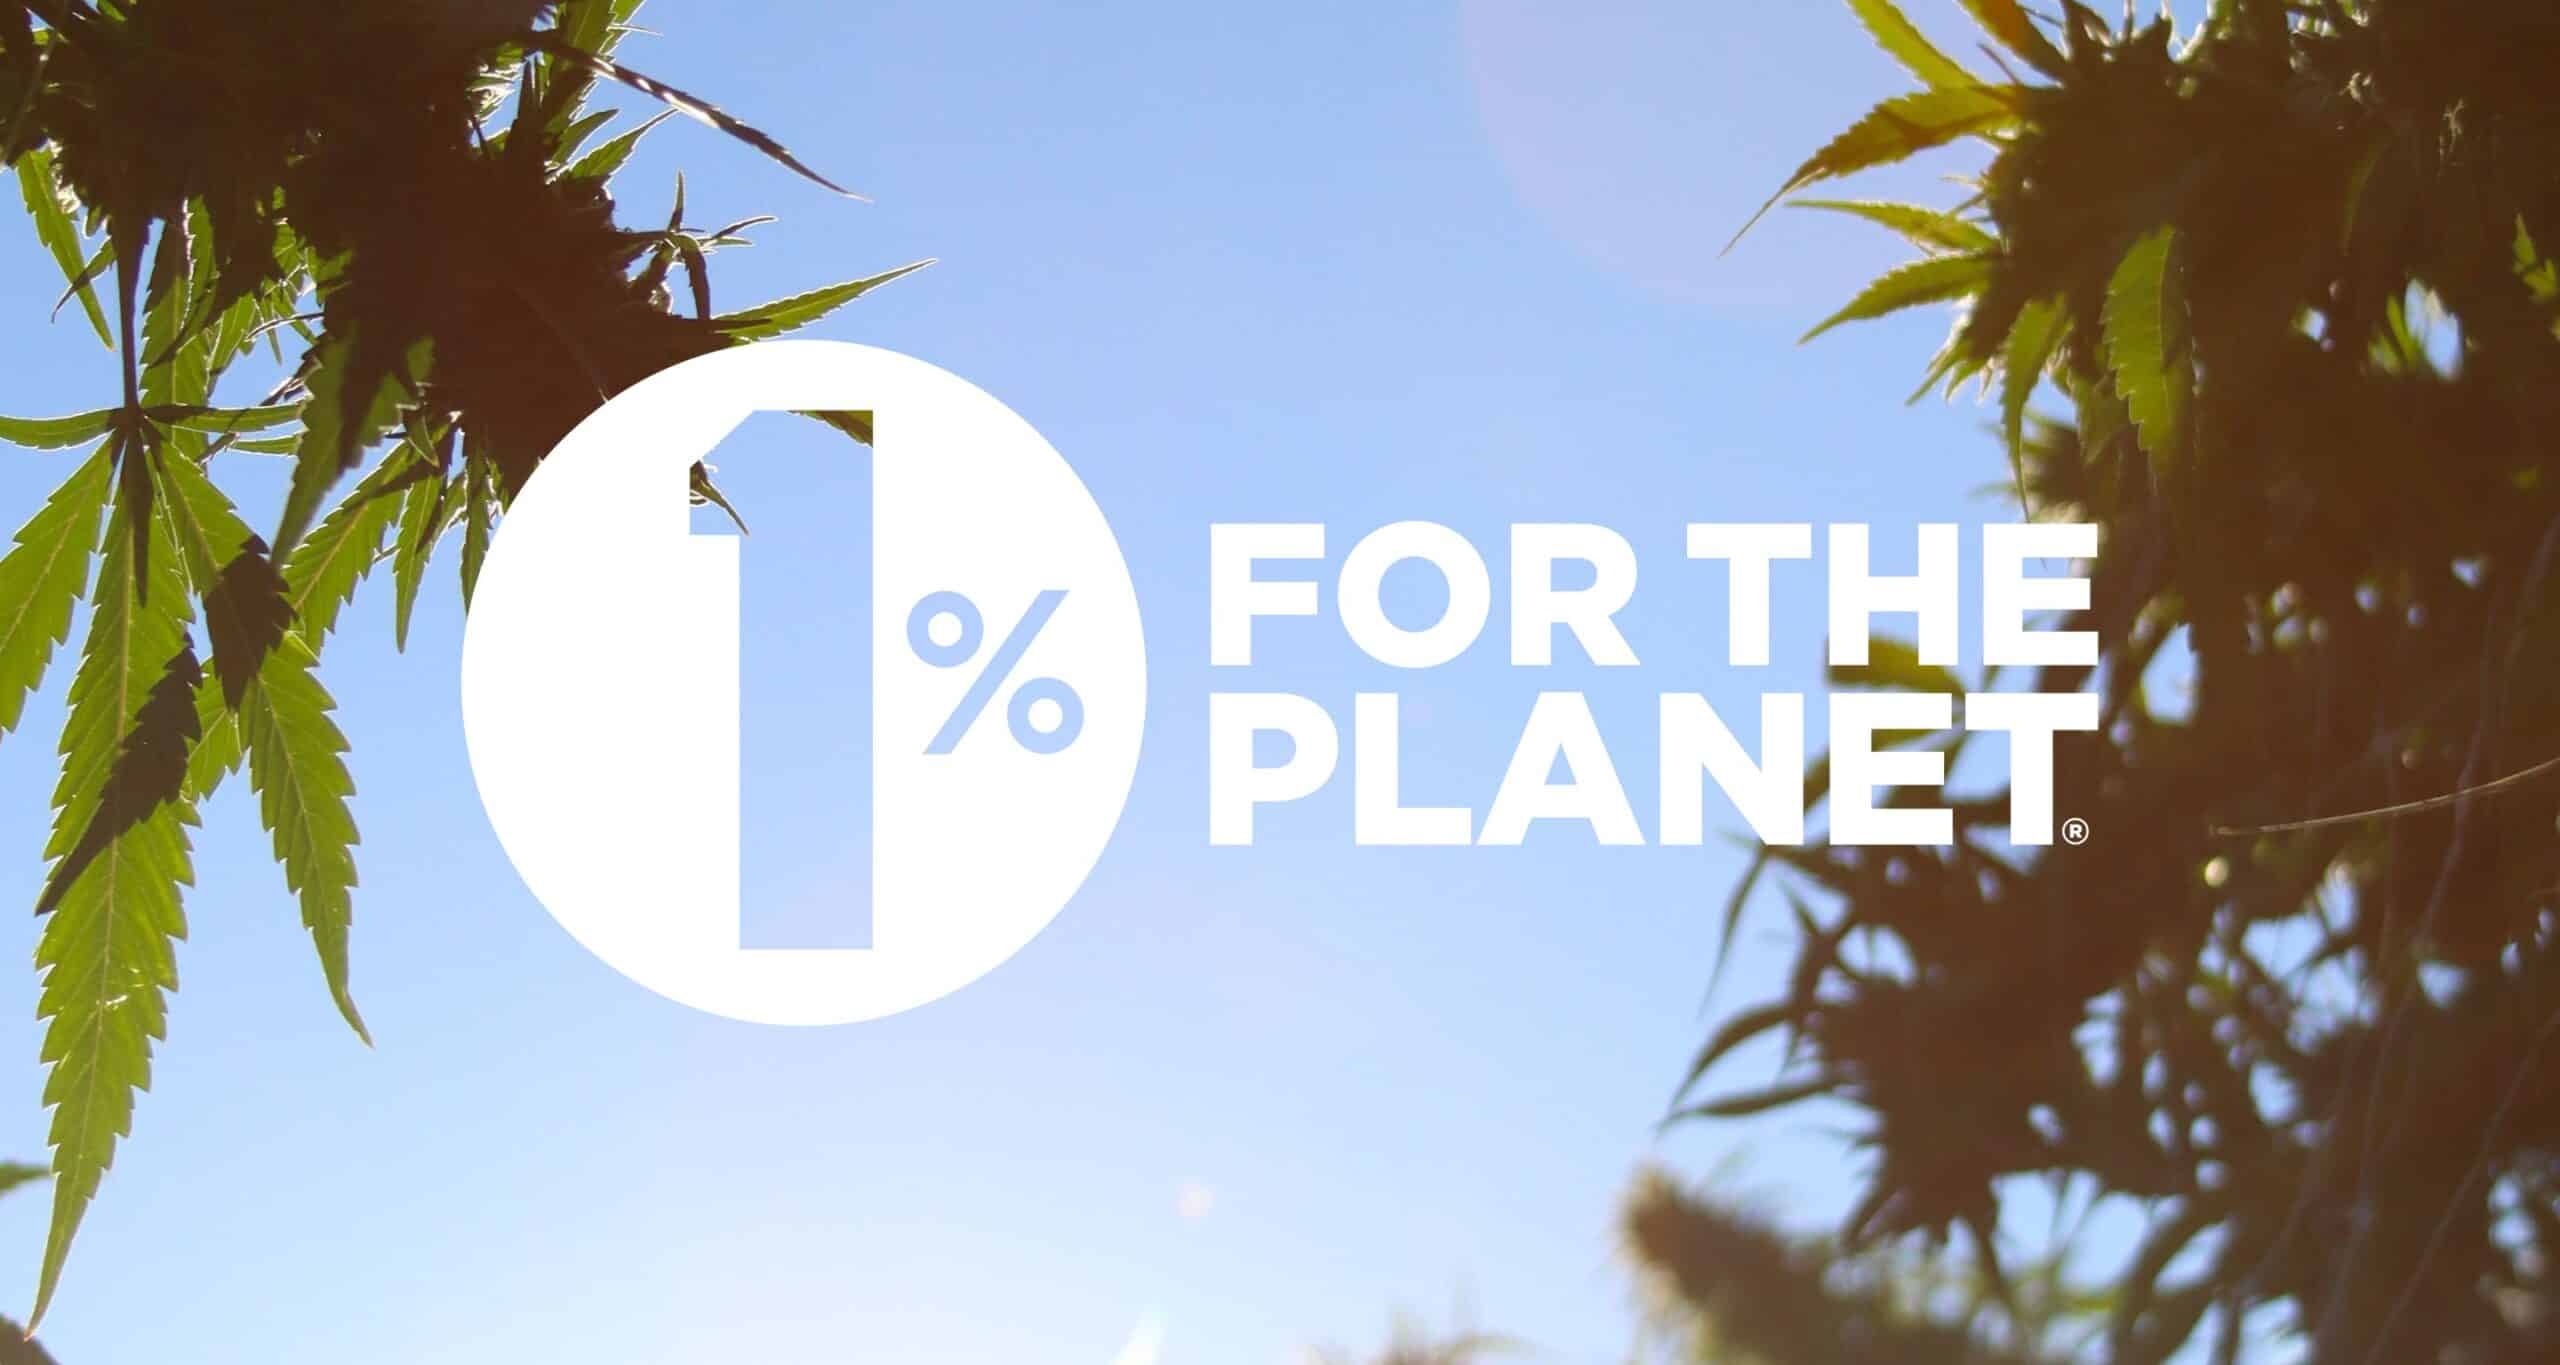 1% Percent for the Planet